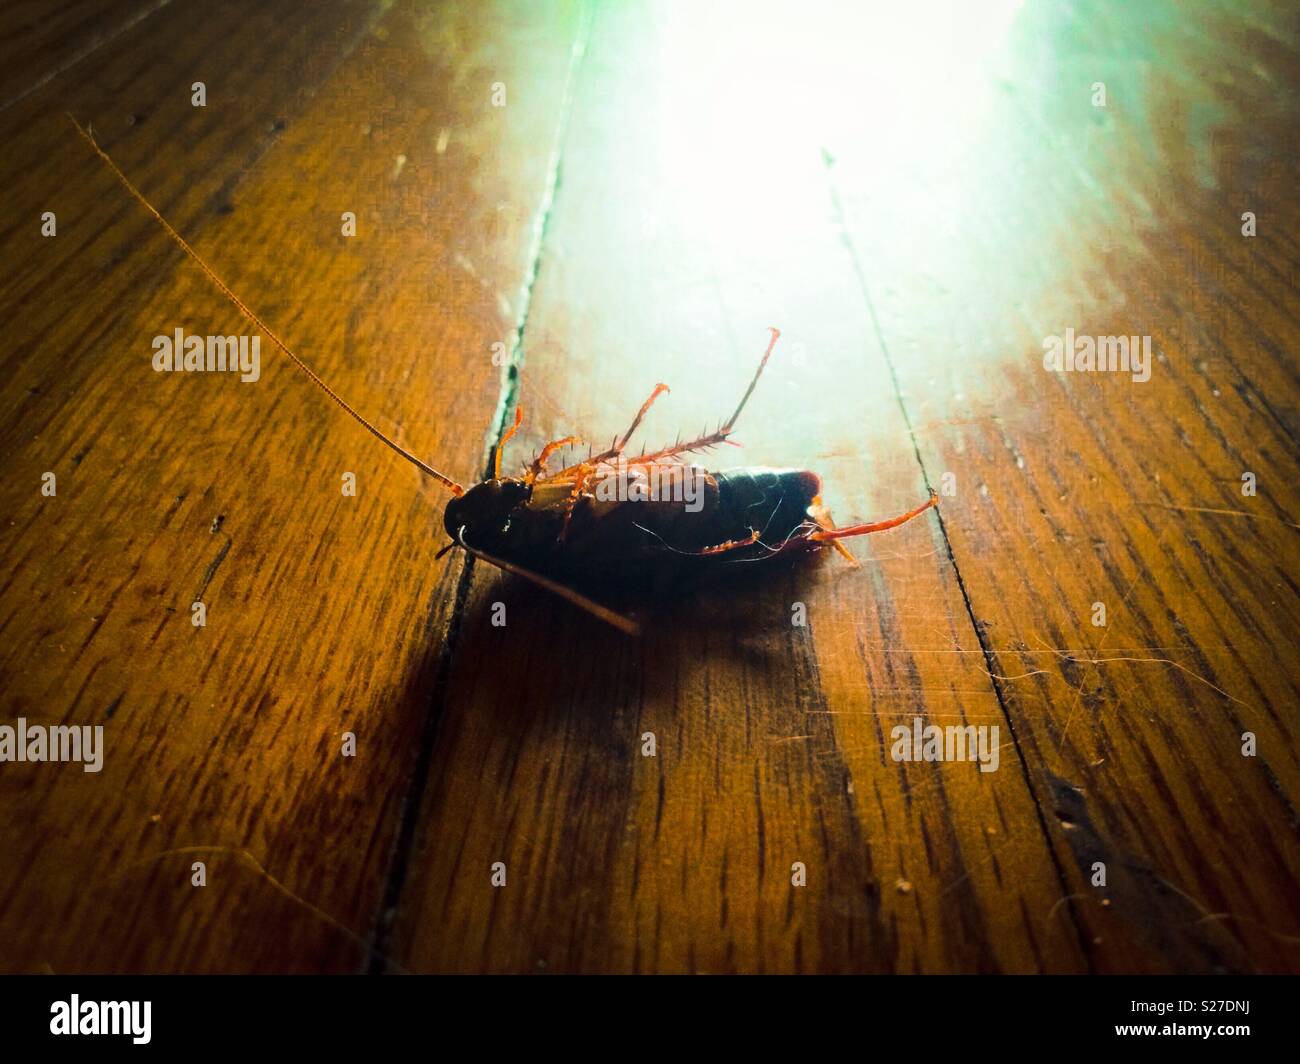 Landscape View Of Dead Palmetto Bug On Wooden Floor Stock Photo